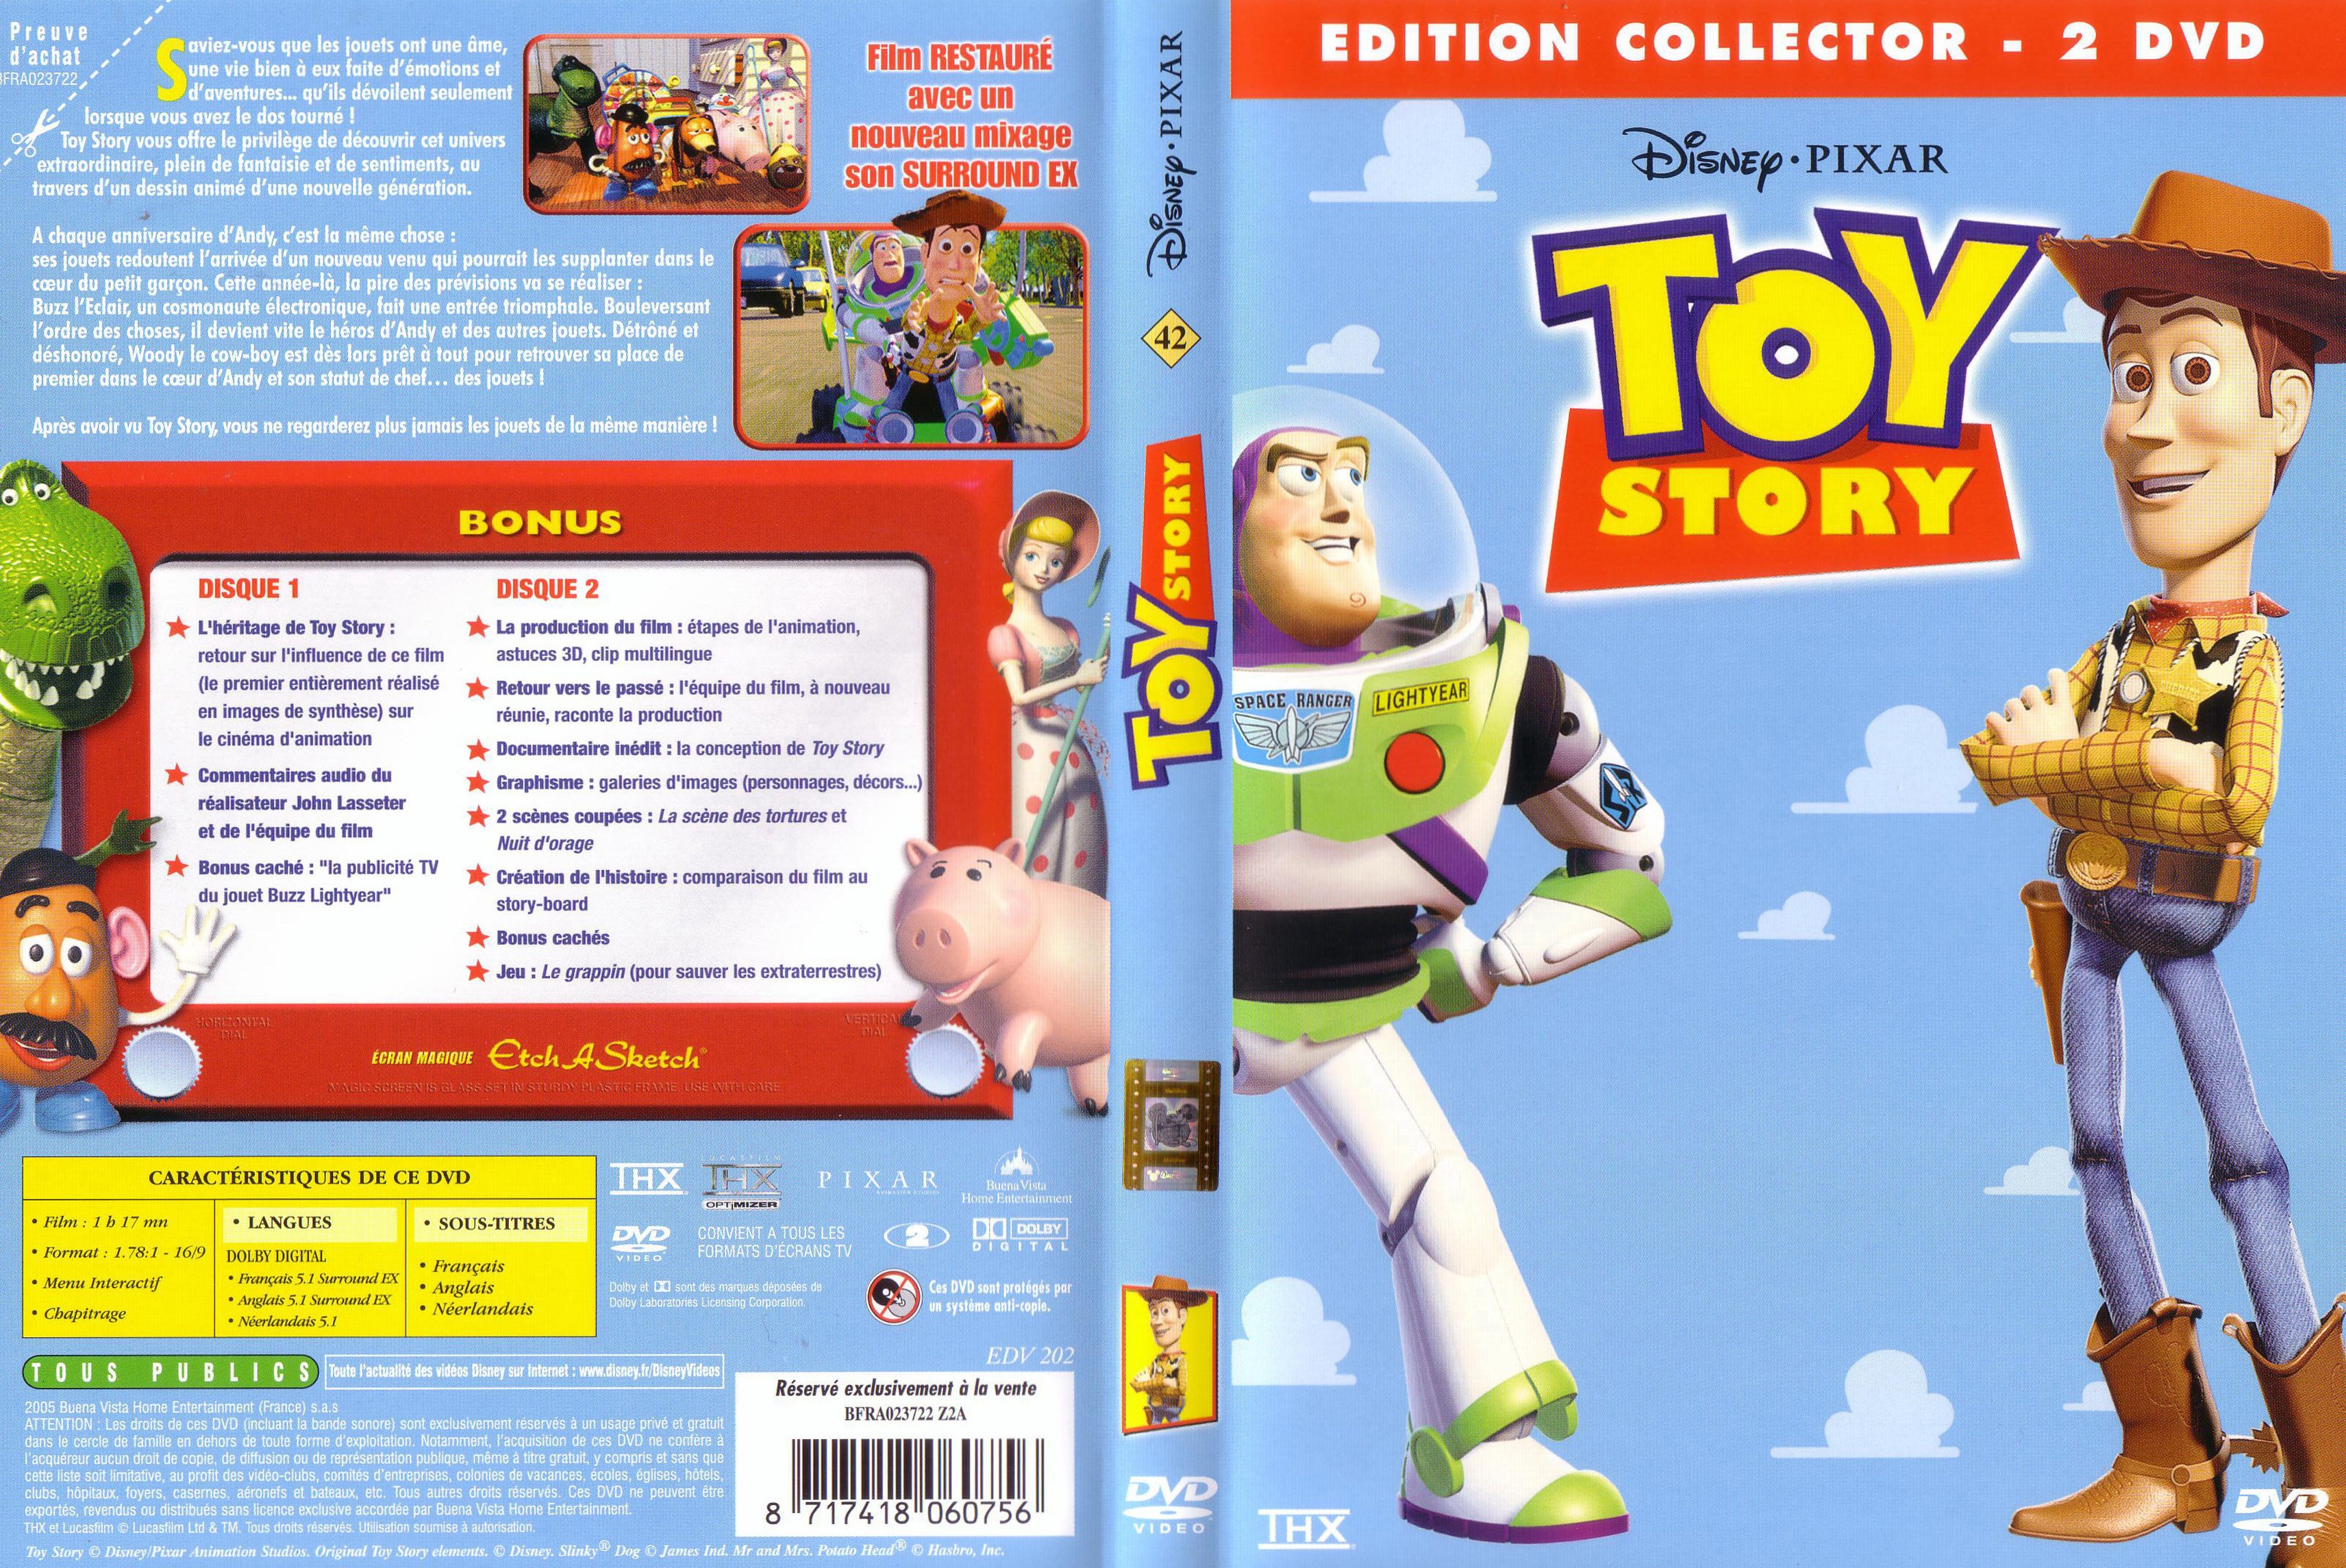 Jaquette DVD Toy story